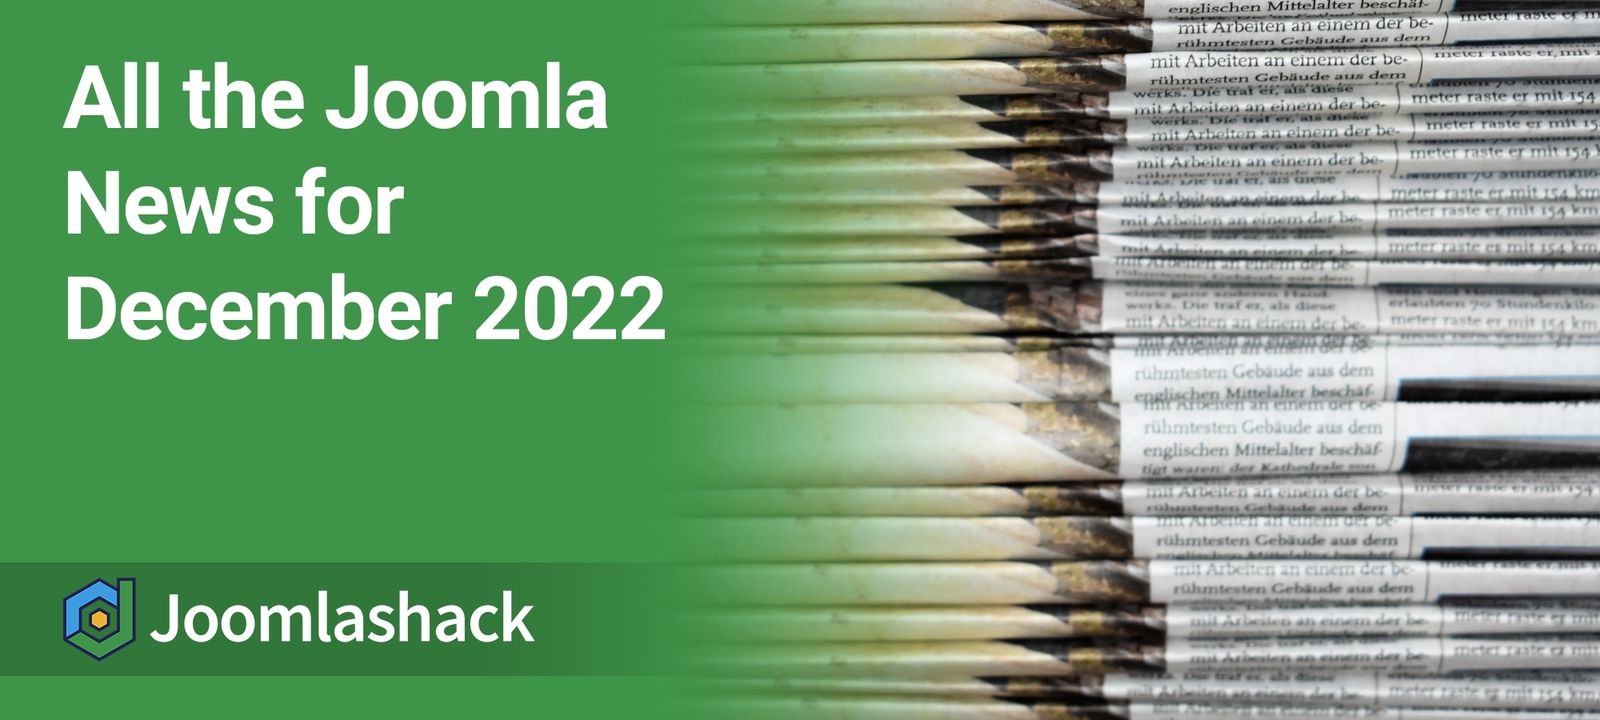 All the Joomla News for December 2022